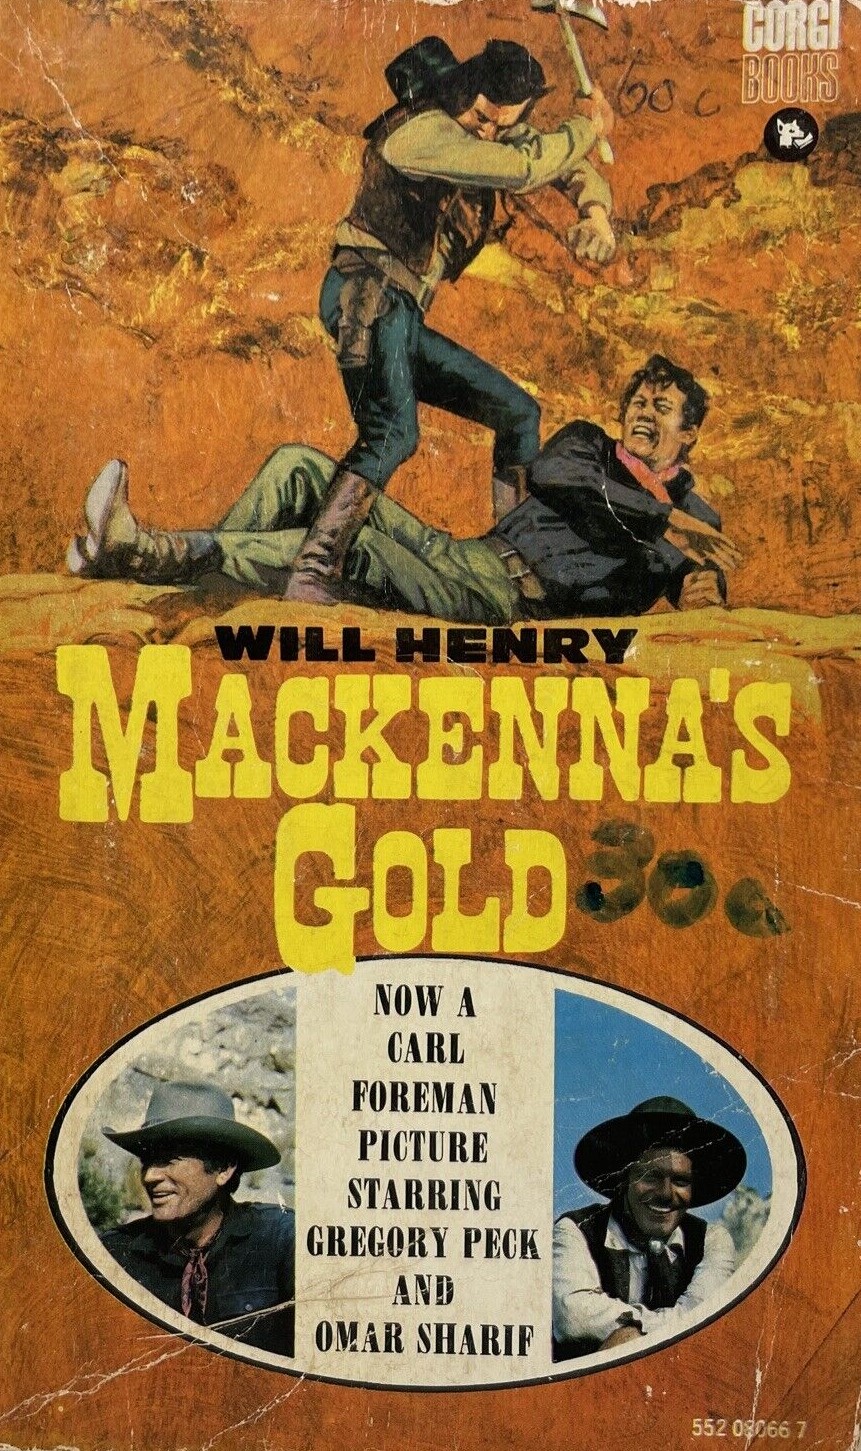 Behind the Scenes: Book into Film – “Mackenna’s Gold” (1969)